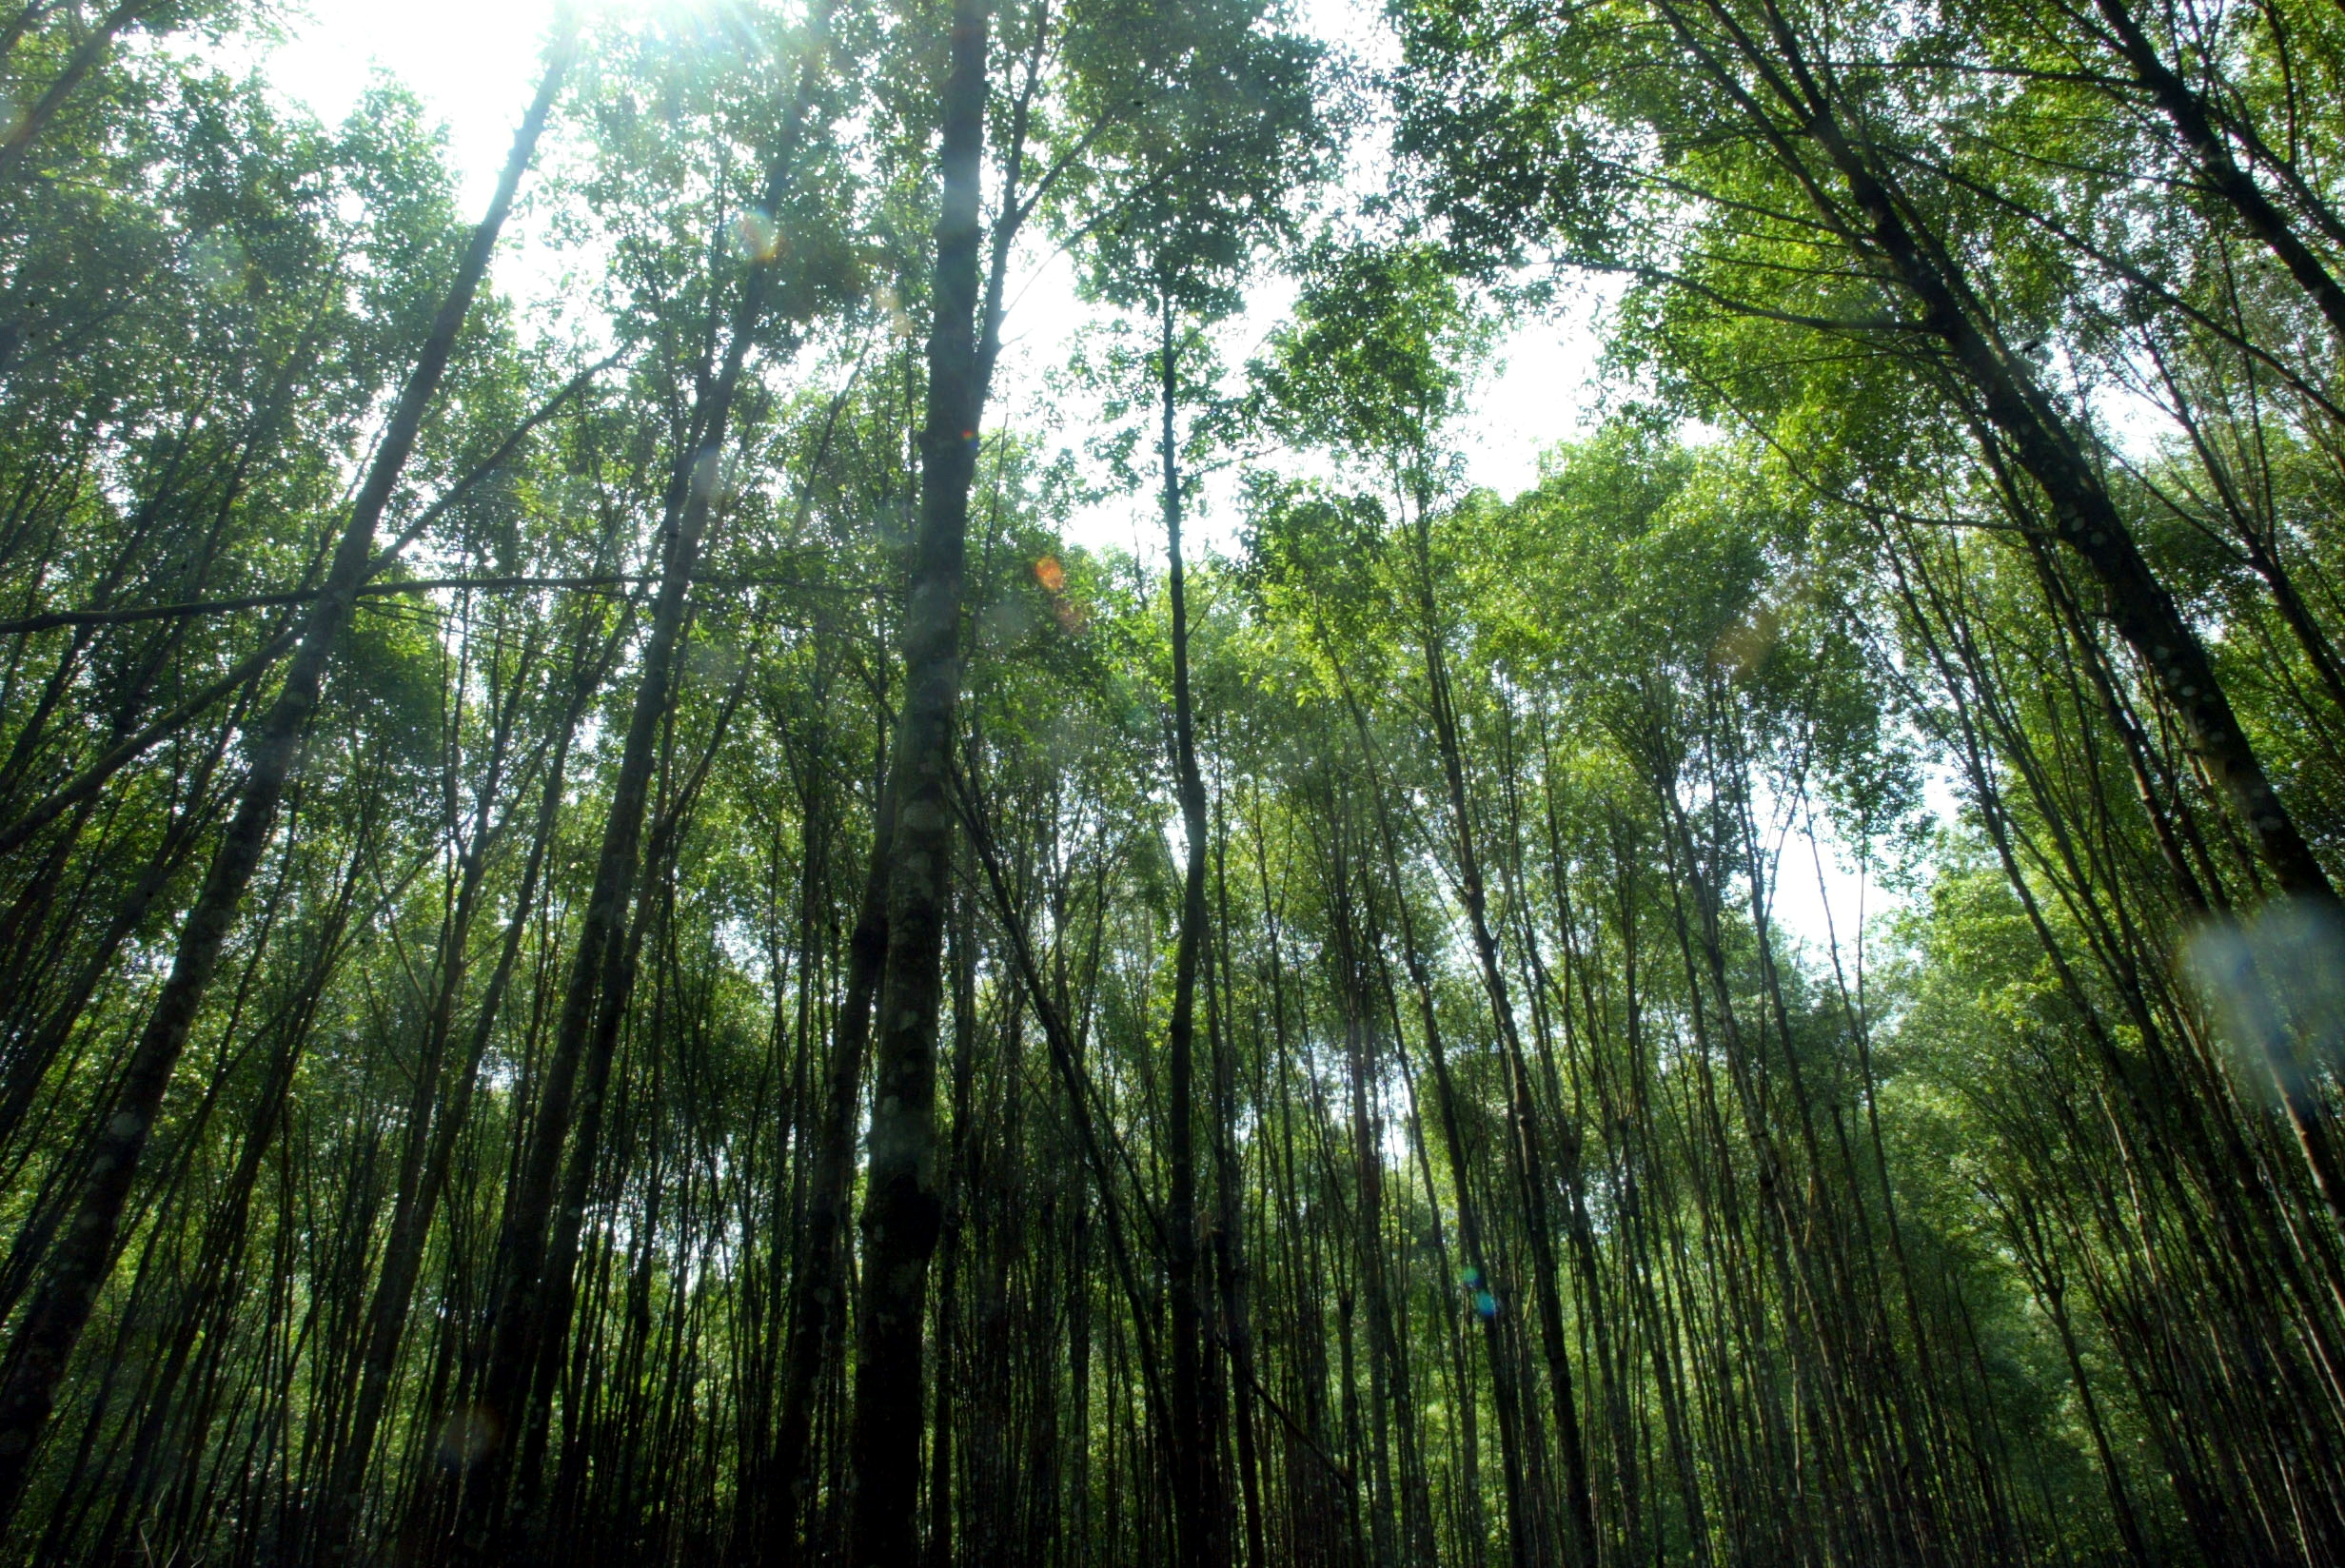 A mangrove forest is seen in Matang in Malaysia's northern state of Perak. Picture taken July 29, 2003